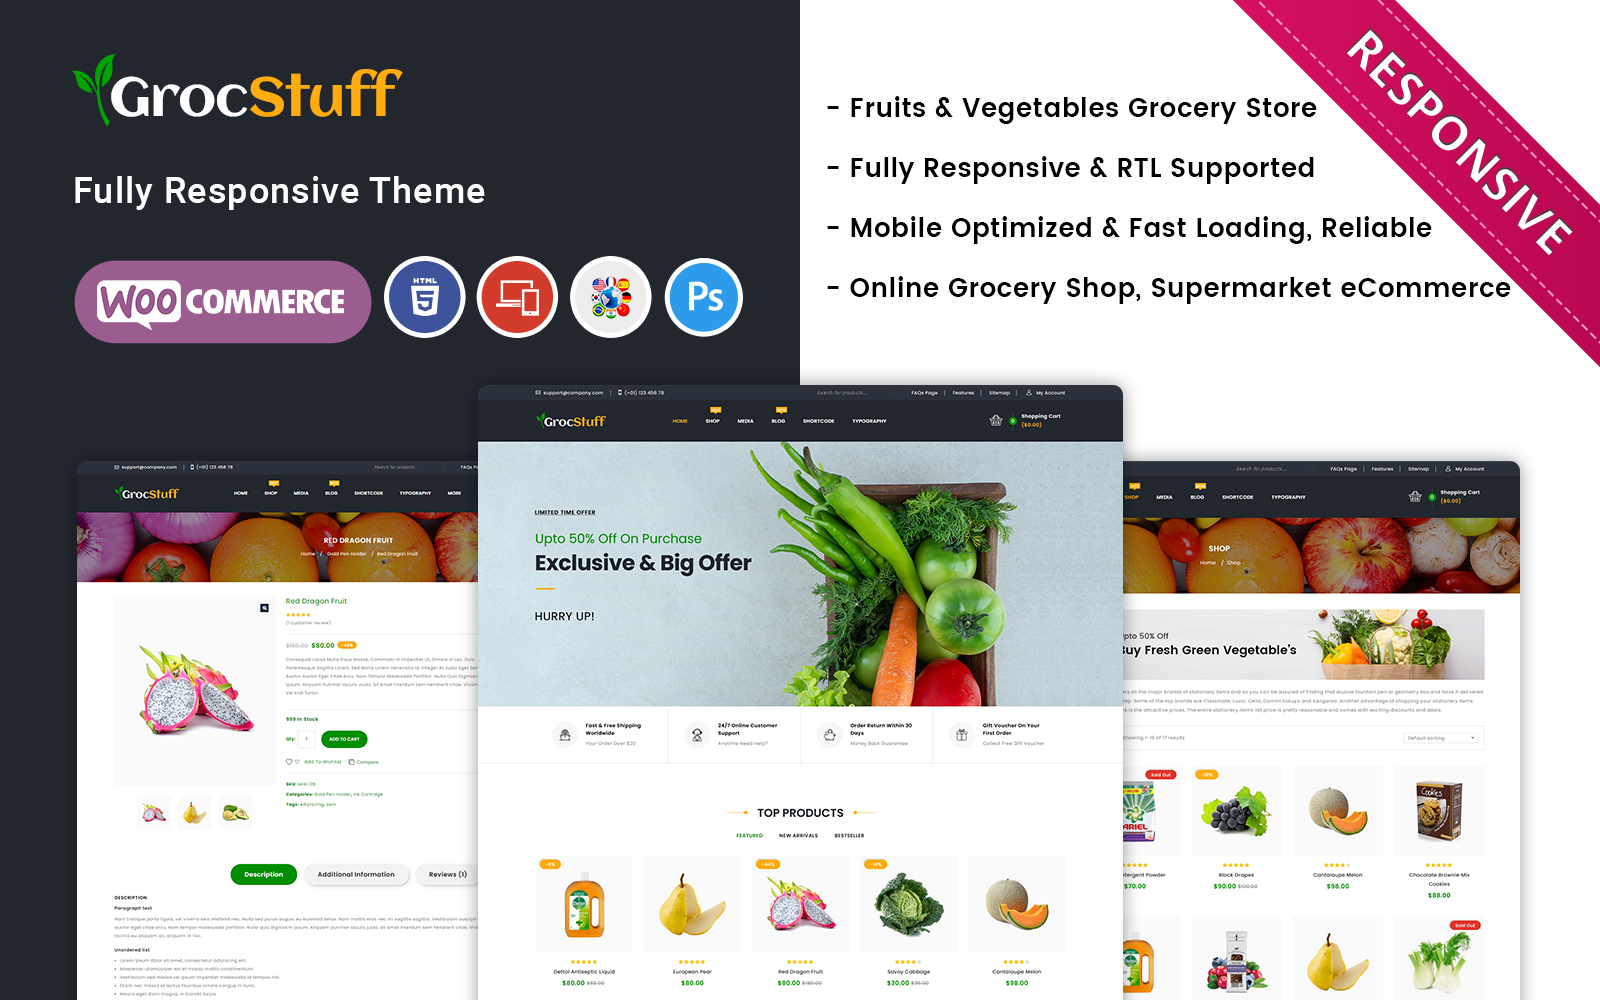 Grocstuff - Vegetable, Fruits and Grocery Supermarket Responsive Woocommerce Theme